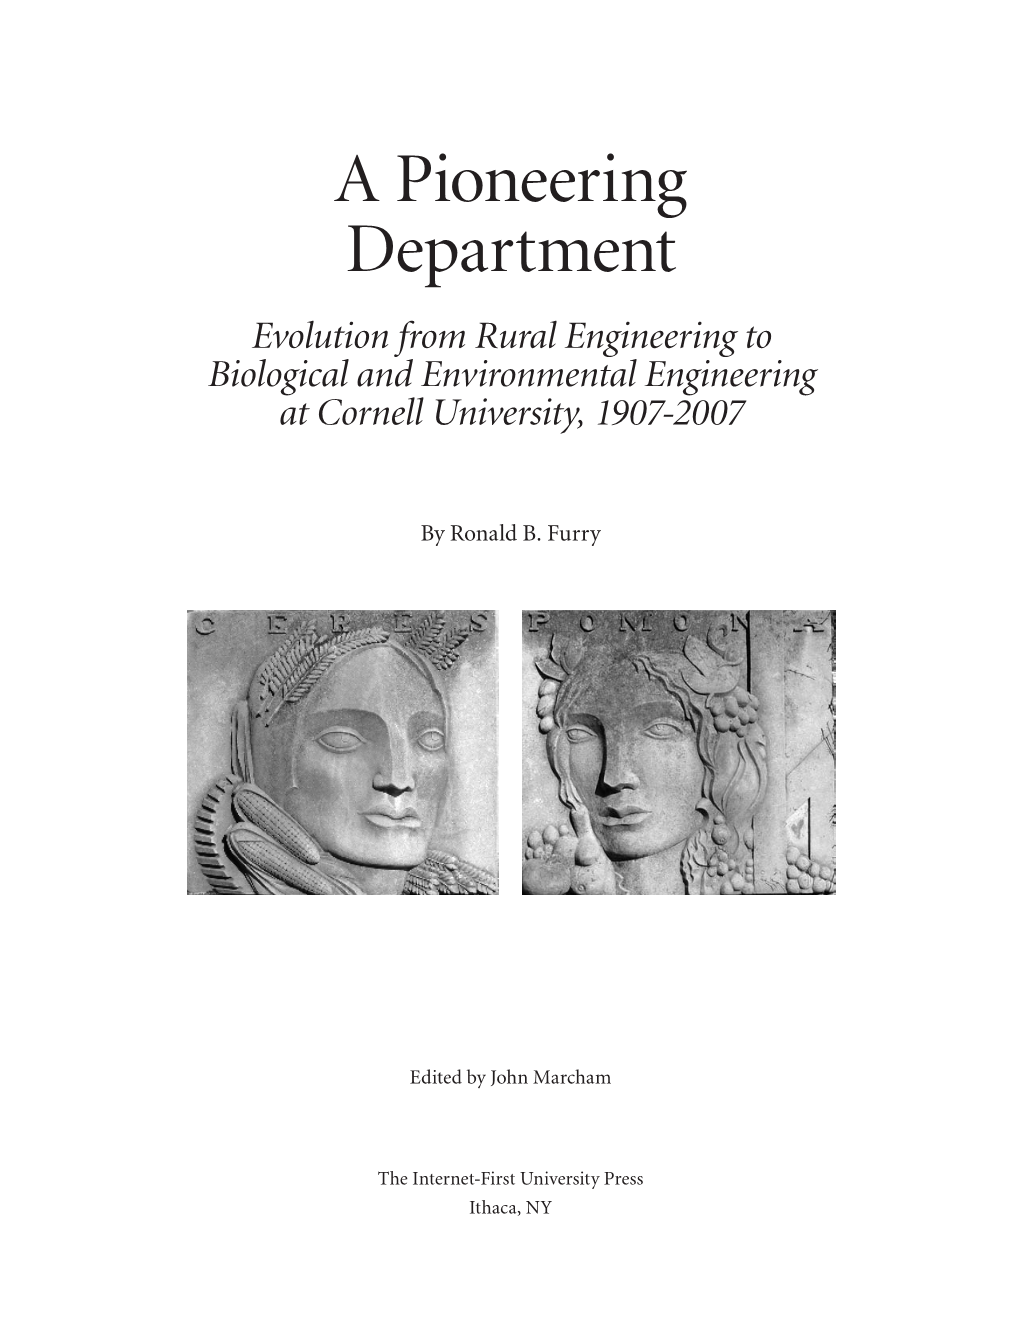 A Pioneering Department Evolution from Rural Engineering to Biological and Environmental Engineering at Cornell University, 1907-2007